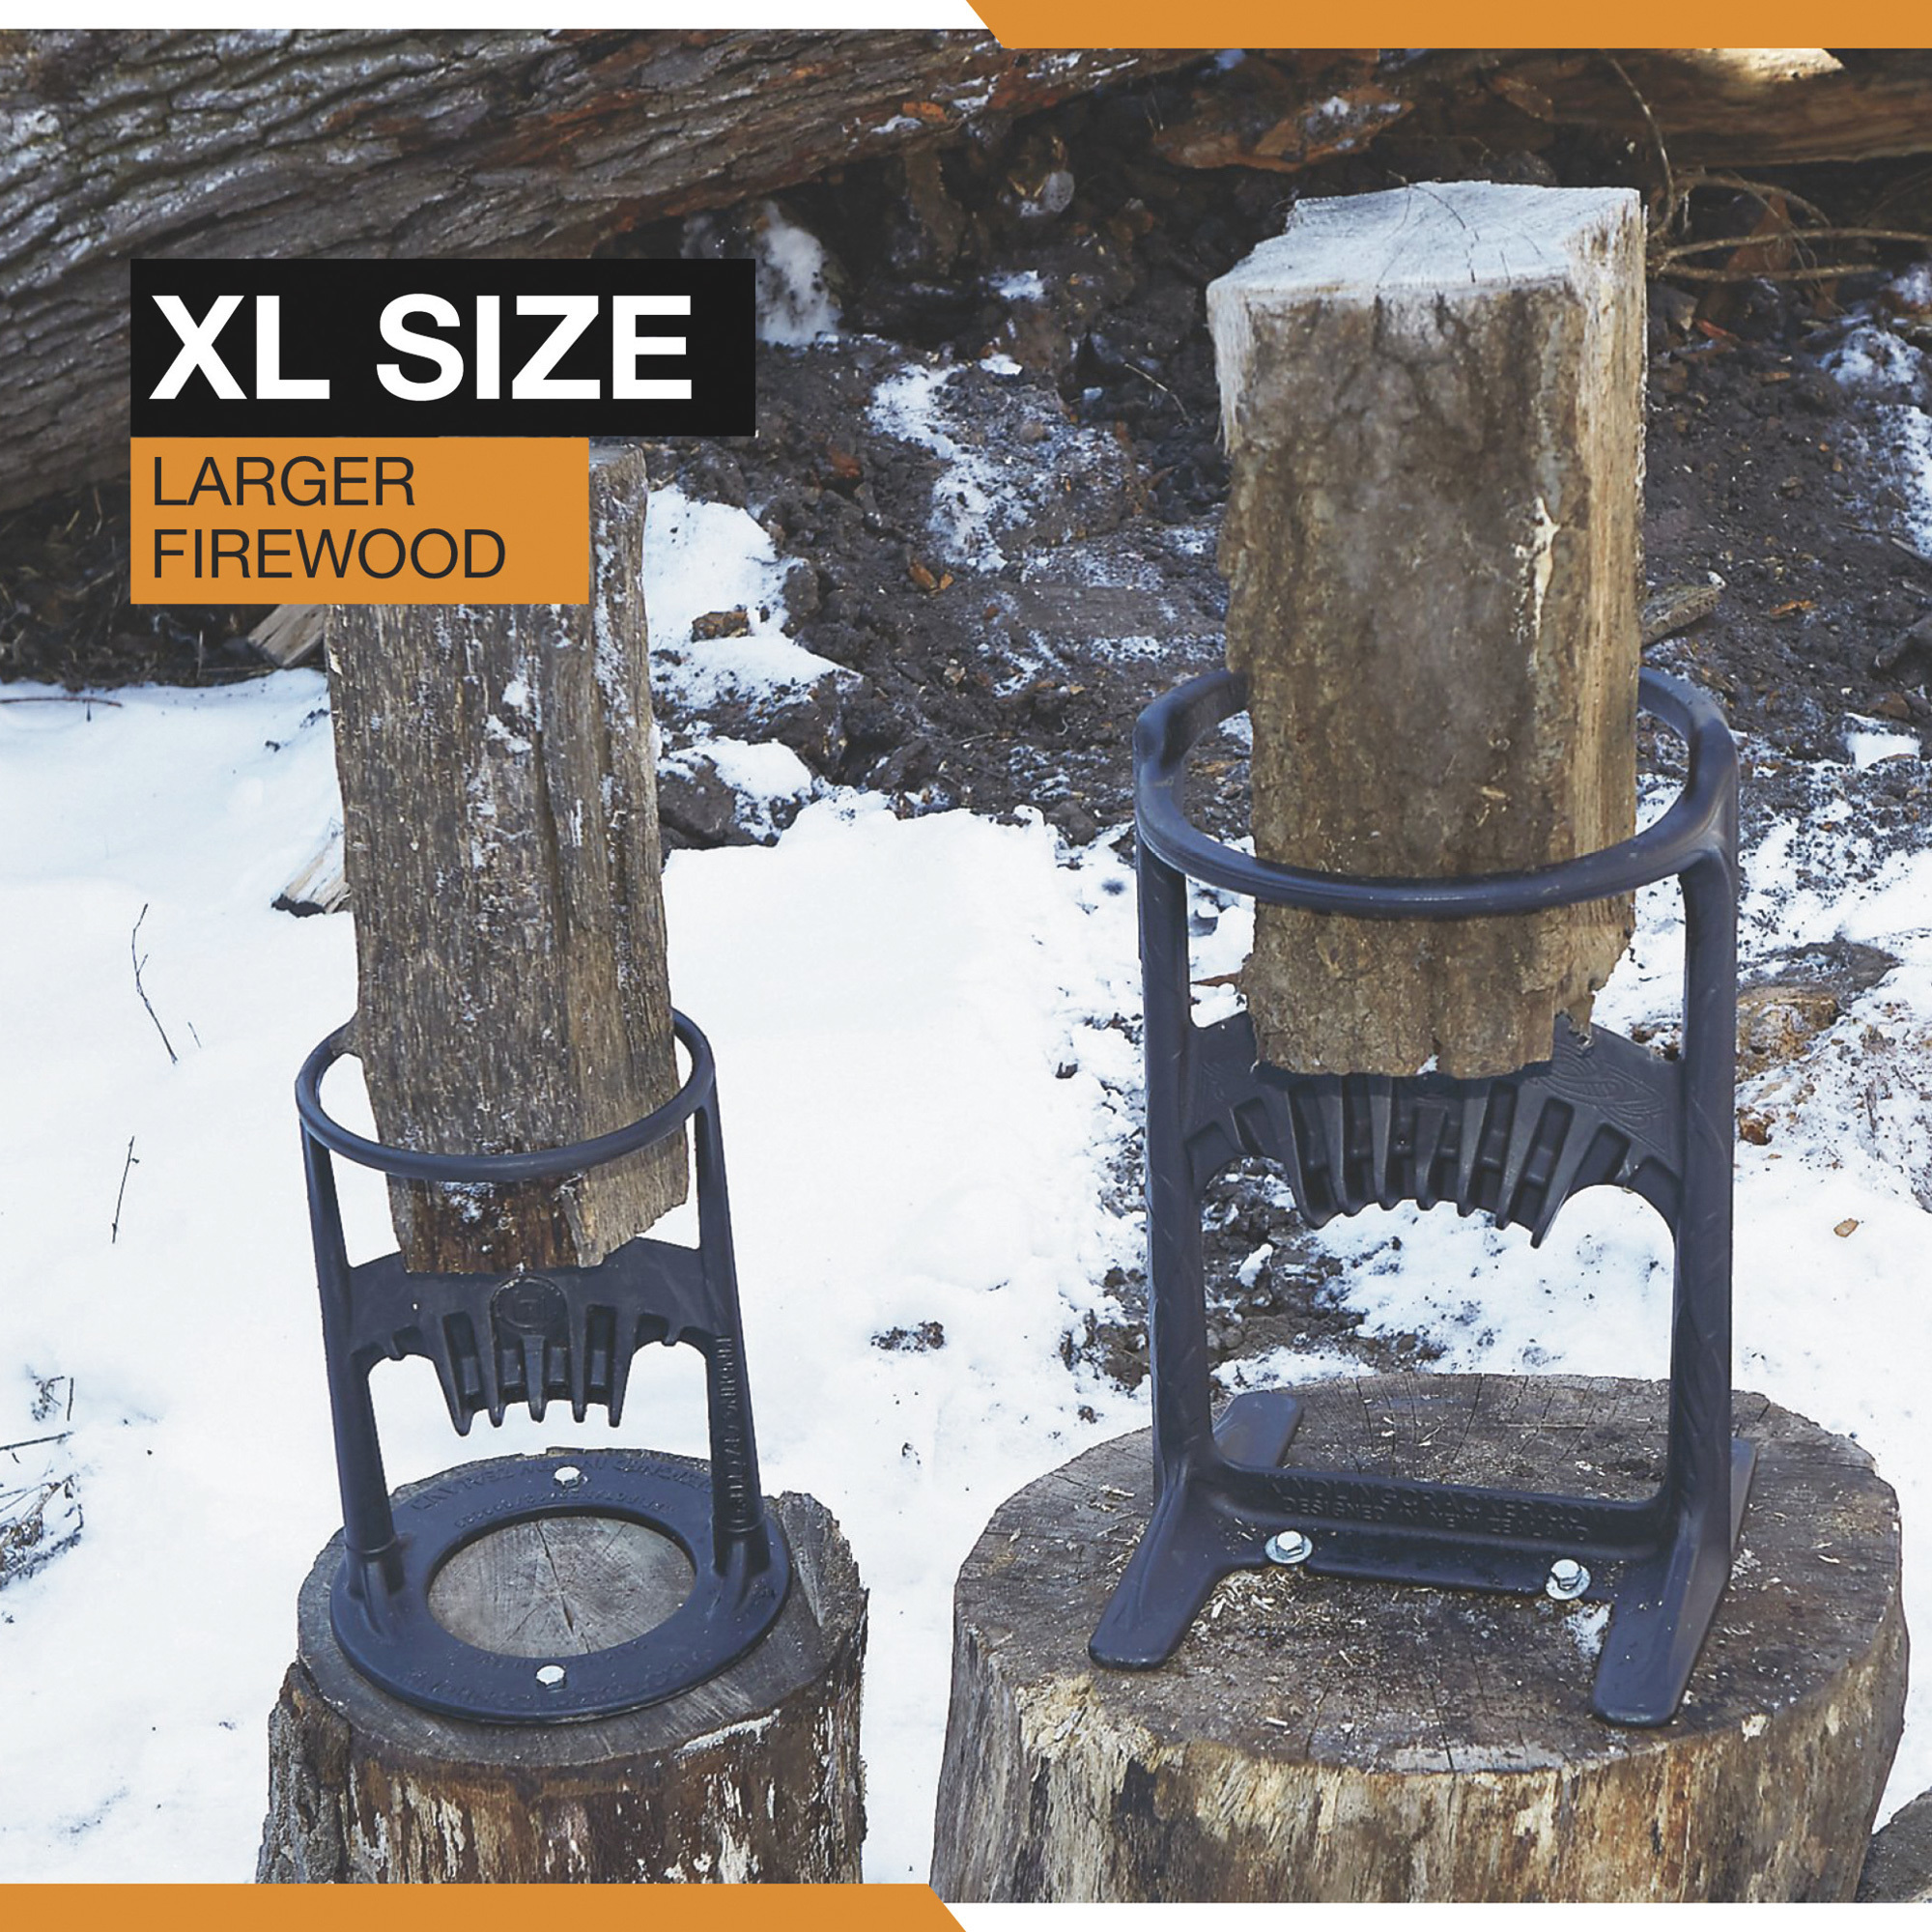 deal: Save 27% on the Kindling Cracker XL Wood Splitter today -  Reviewed